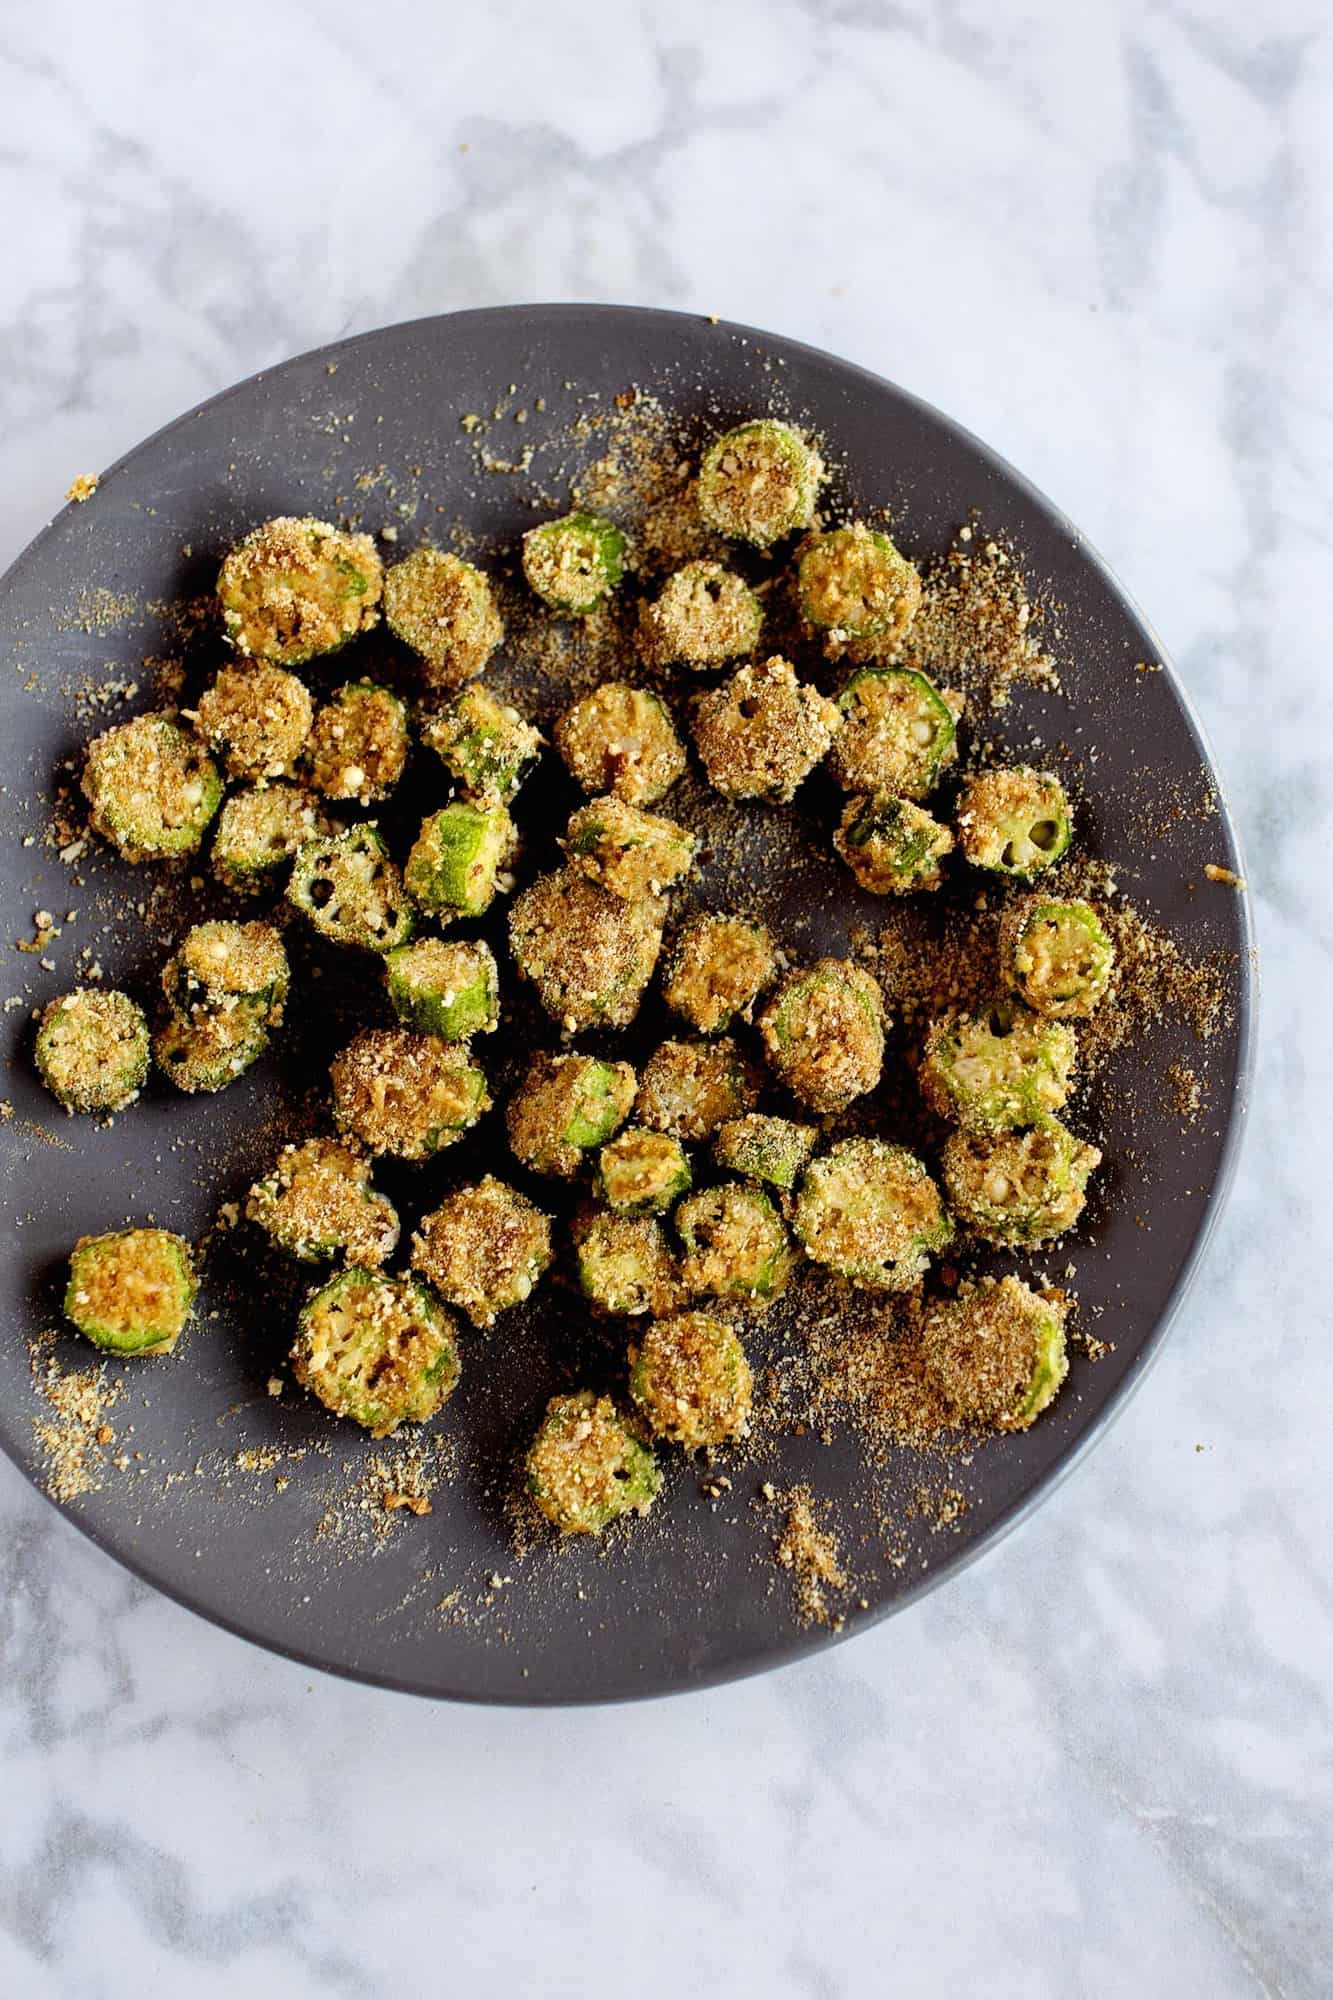 cut up okra on black plate with bread crumbs sprinkled over it